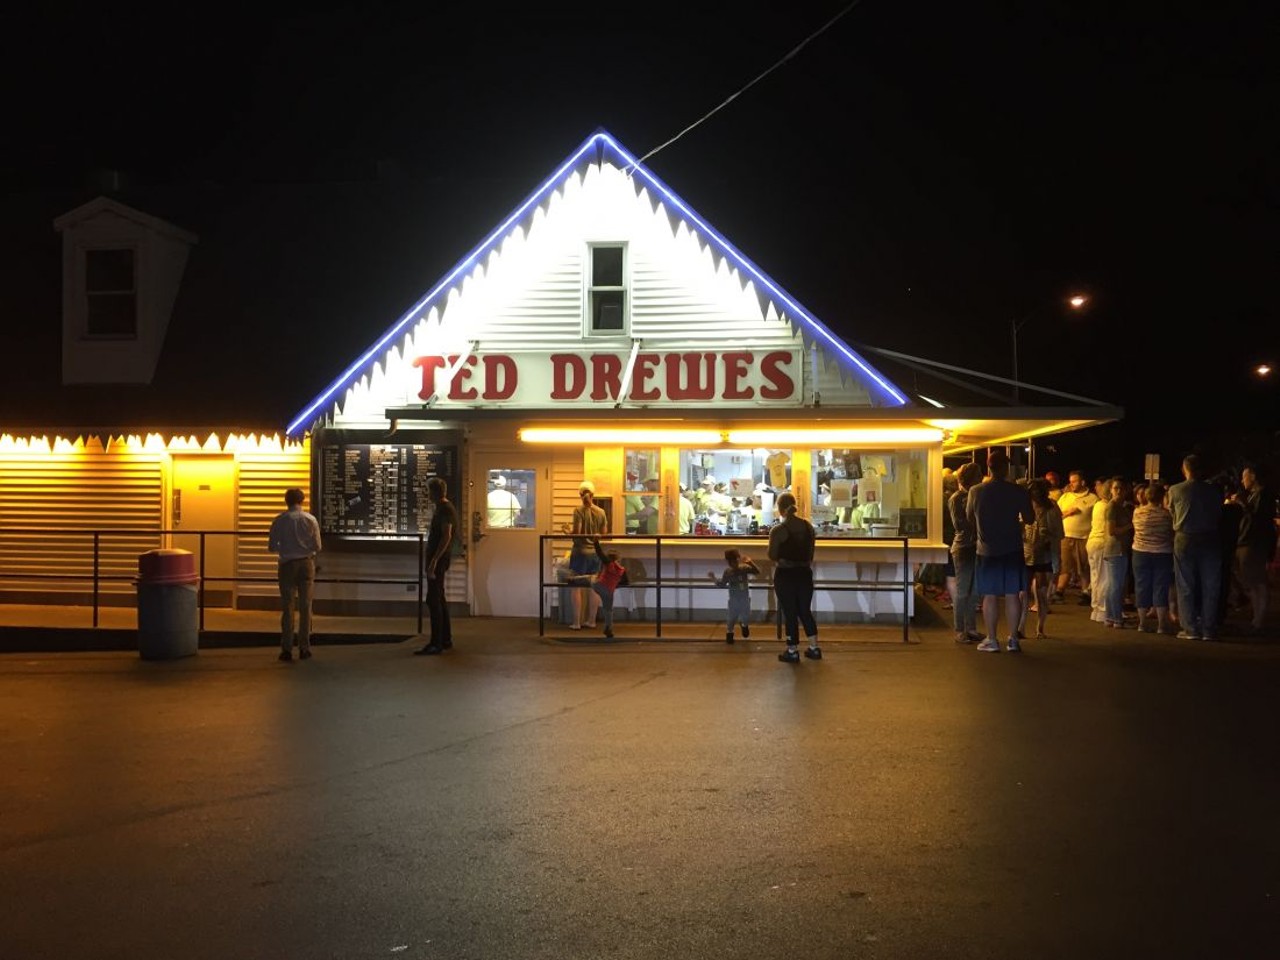 Ted Drewes Frozen Custard
(two locations including 6726 Chippewa Street; 314-481-2652)
It really is good, guys. Once you've tried the frozen custard at Ted Drewes, you'll never want to go back to regular ol' ice cream. It's so creamy and thick that employees will often flip your order upside down before handing it to you just to illustrate that you're in for something unique. Both locations can get crowded on summer nights, but that's part of the fun. Kick back, eat your treat and watch St. Louis roll past.
Photo credit: Jaime Lees